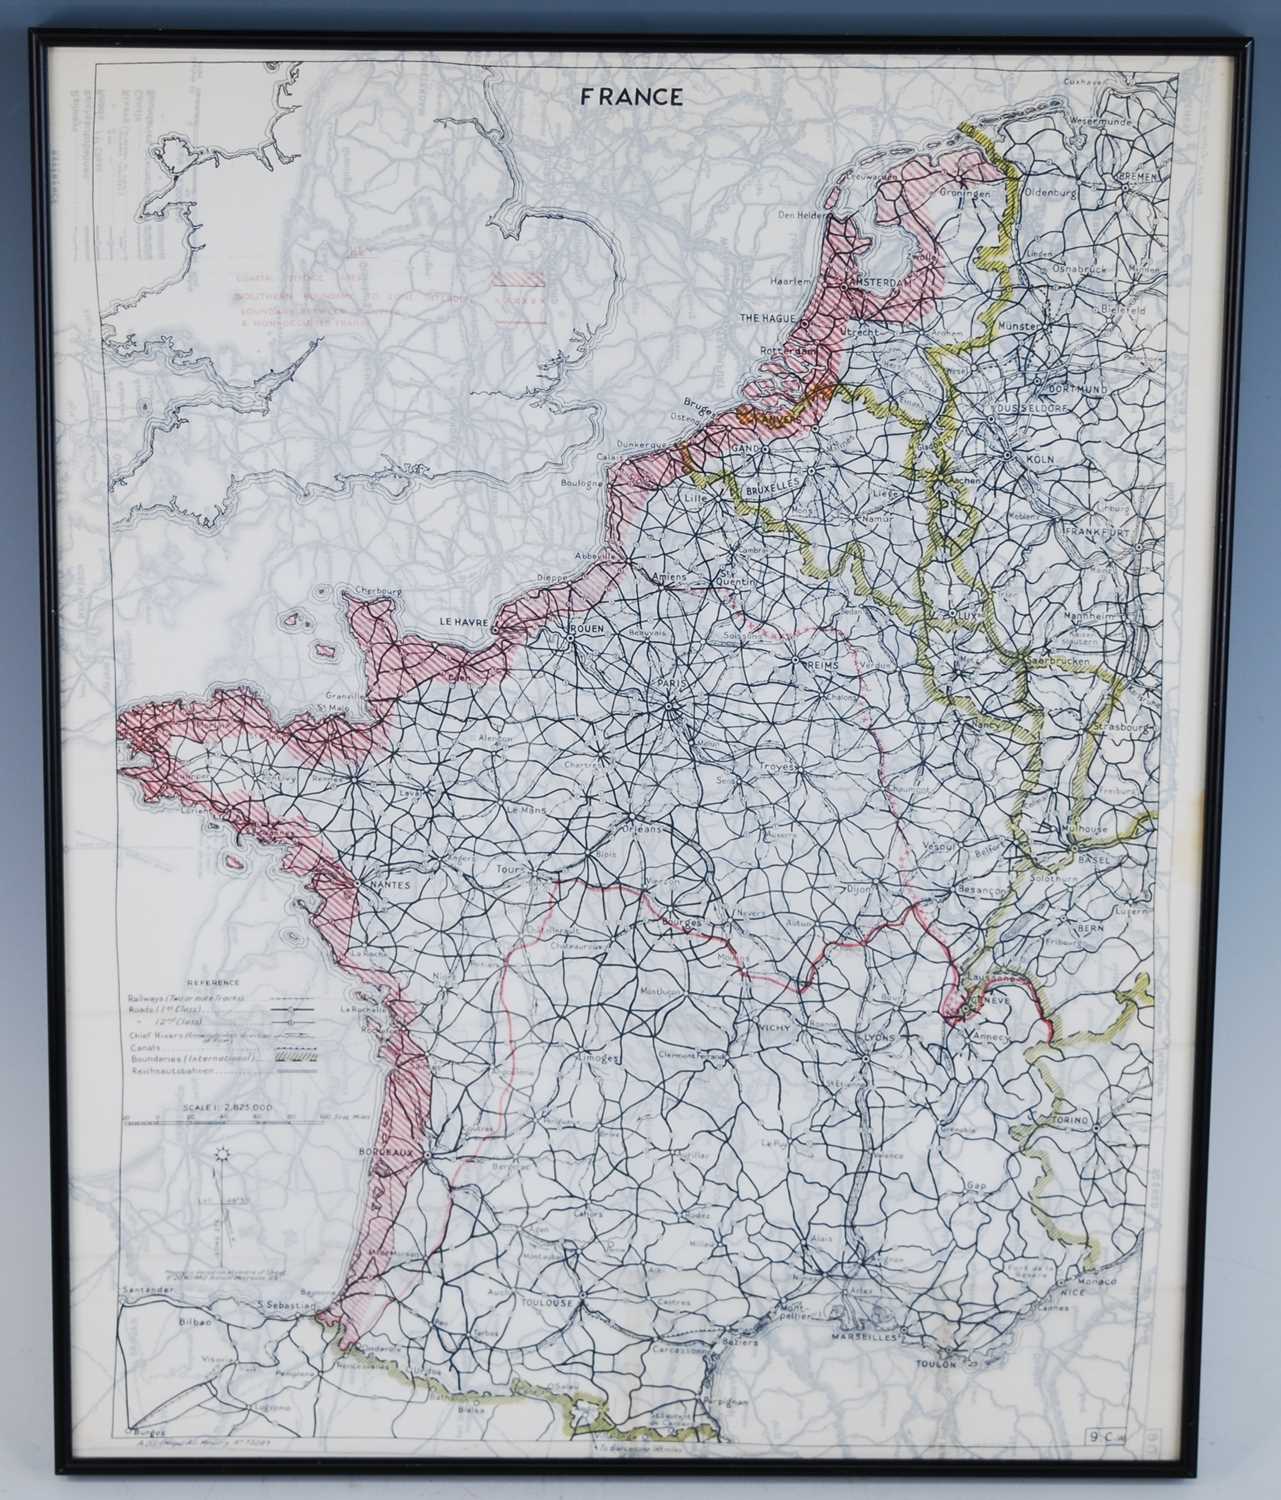 A WW II double sided silk map of North Africa, scale 1:3,000.000 or 47.34 English miles to an - Image 9 of 9